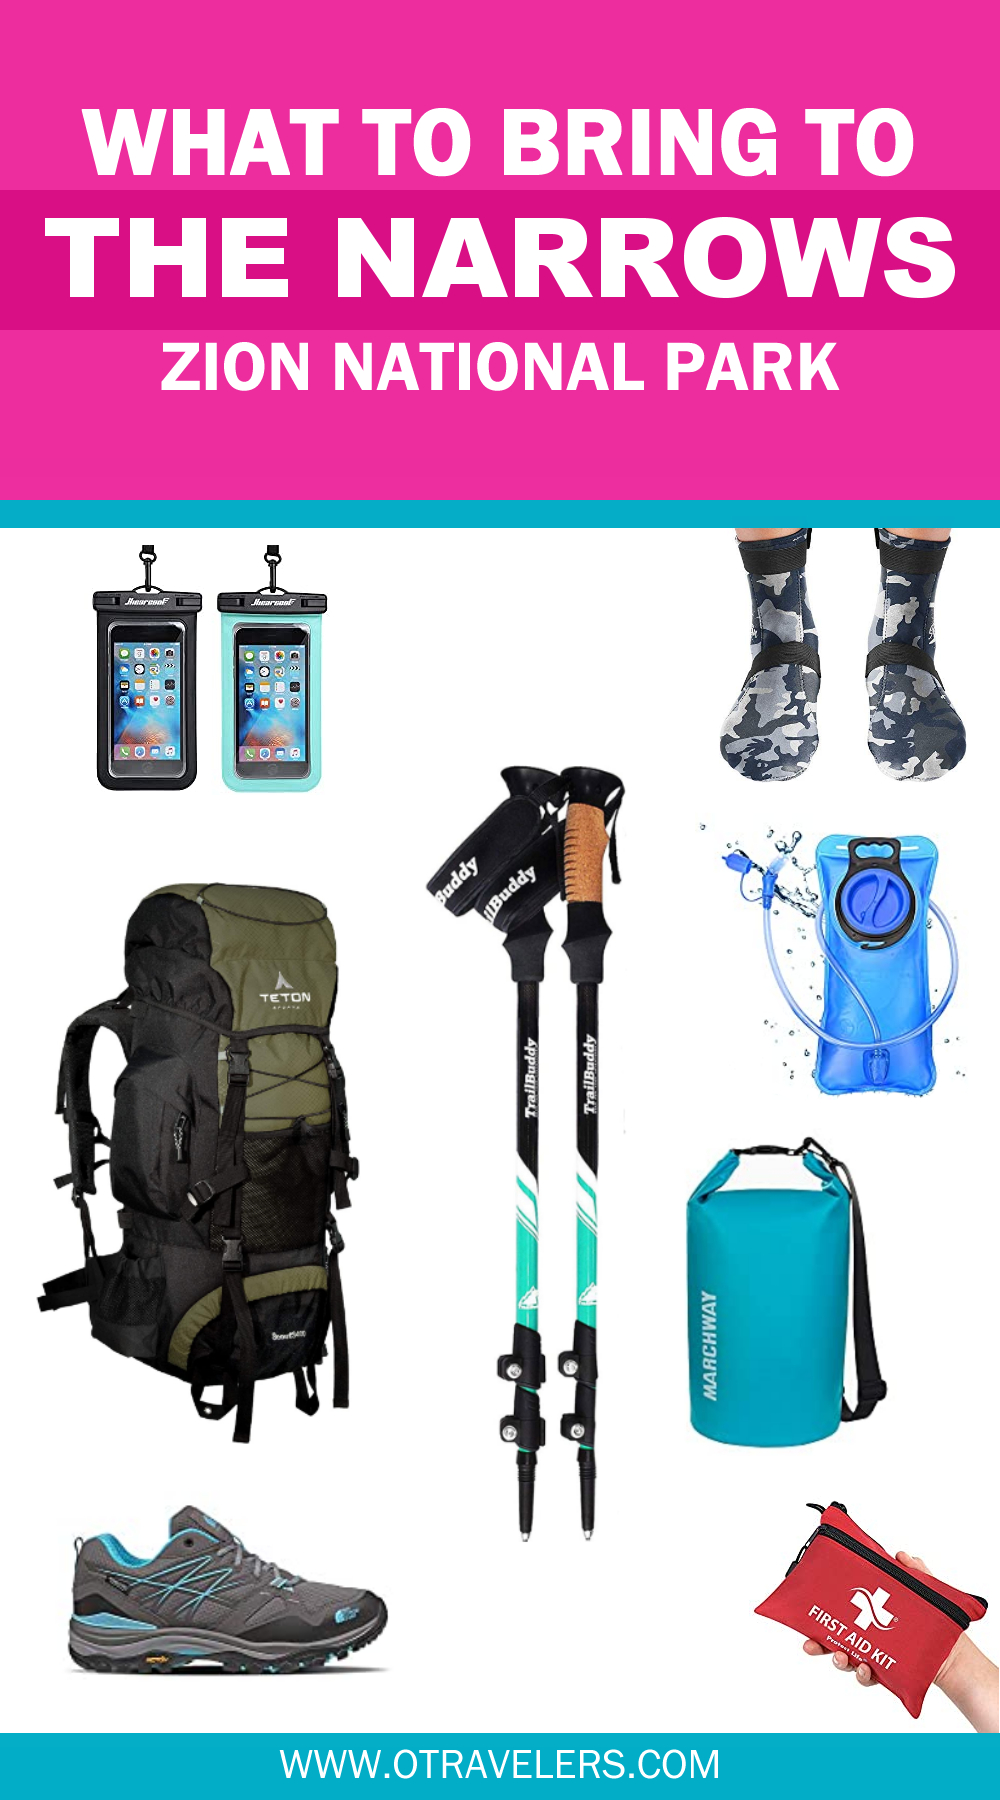 What to bring to The Narrows Zion National Park Trip - Product Images